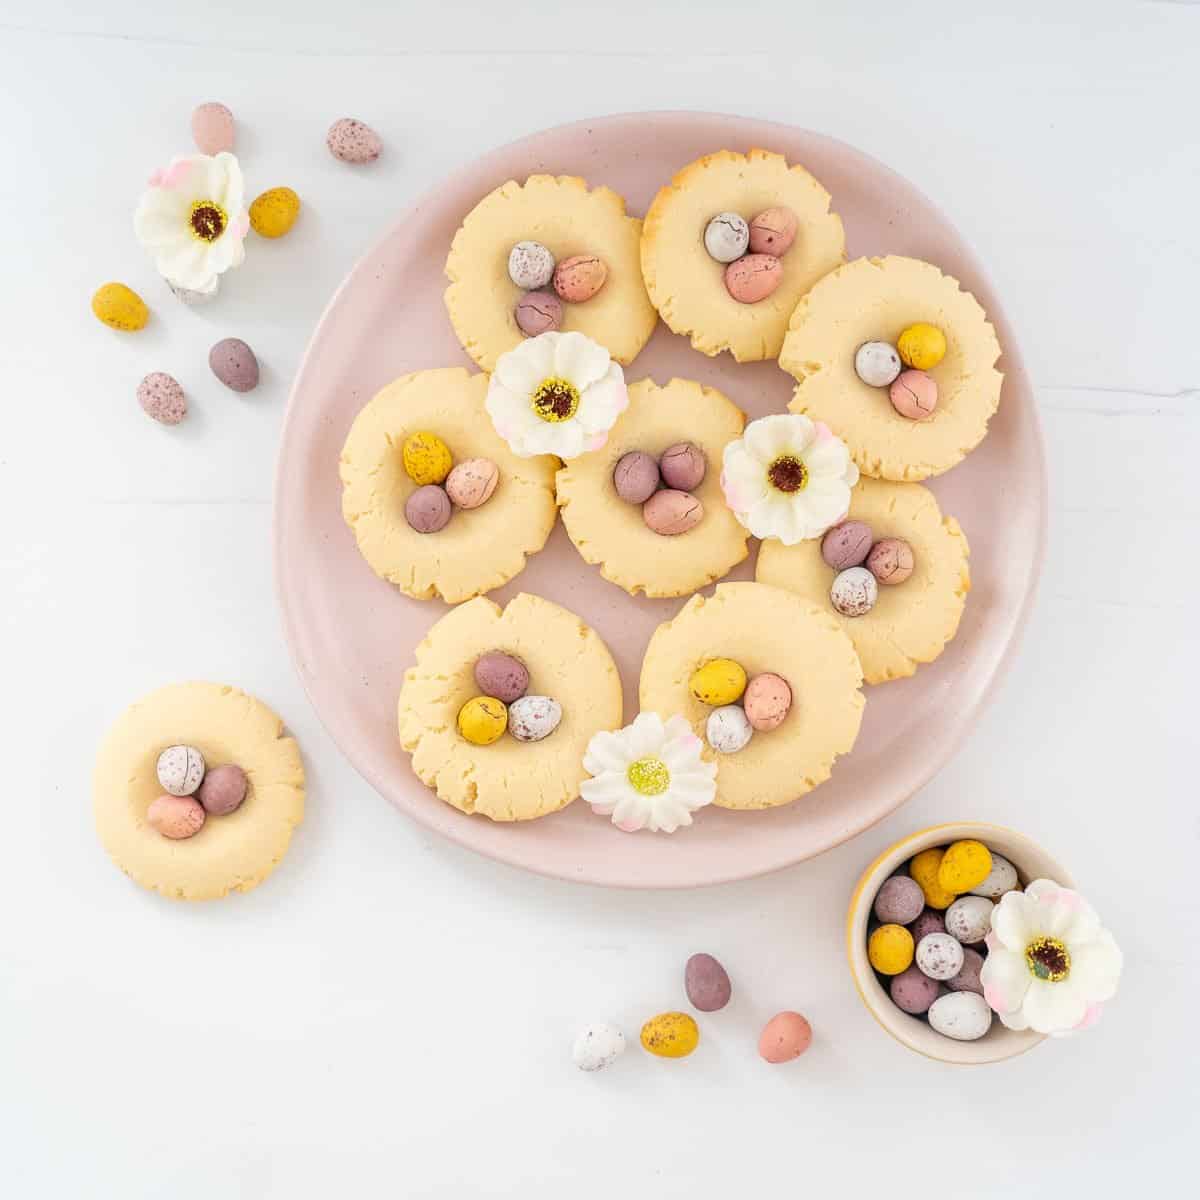 9 vanilla cookies decorated with cadbury mini eggs on a pink plate.